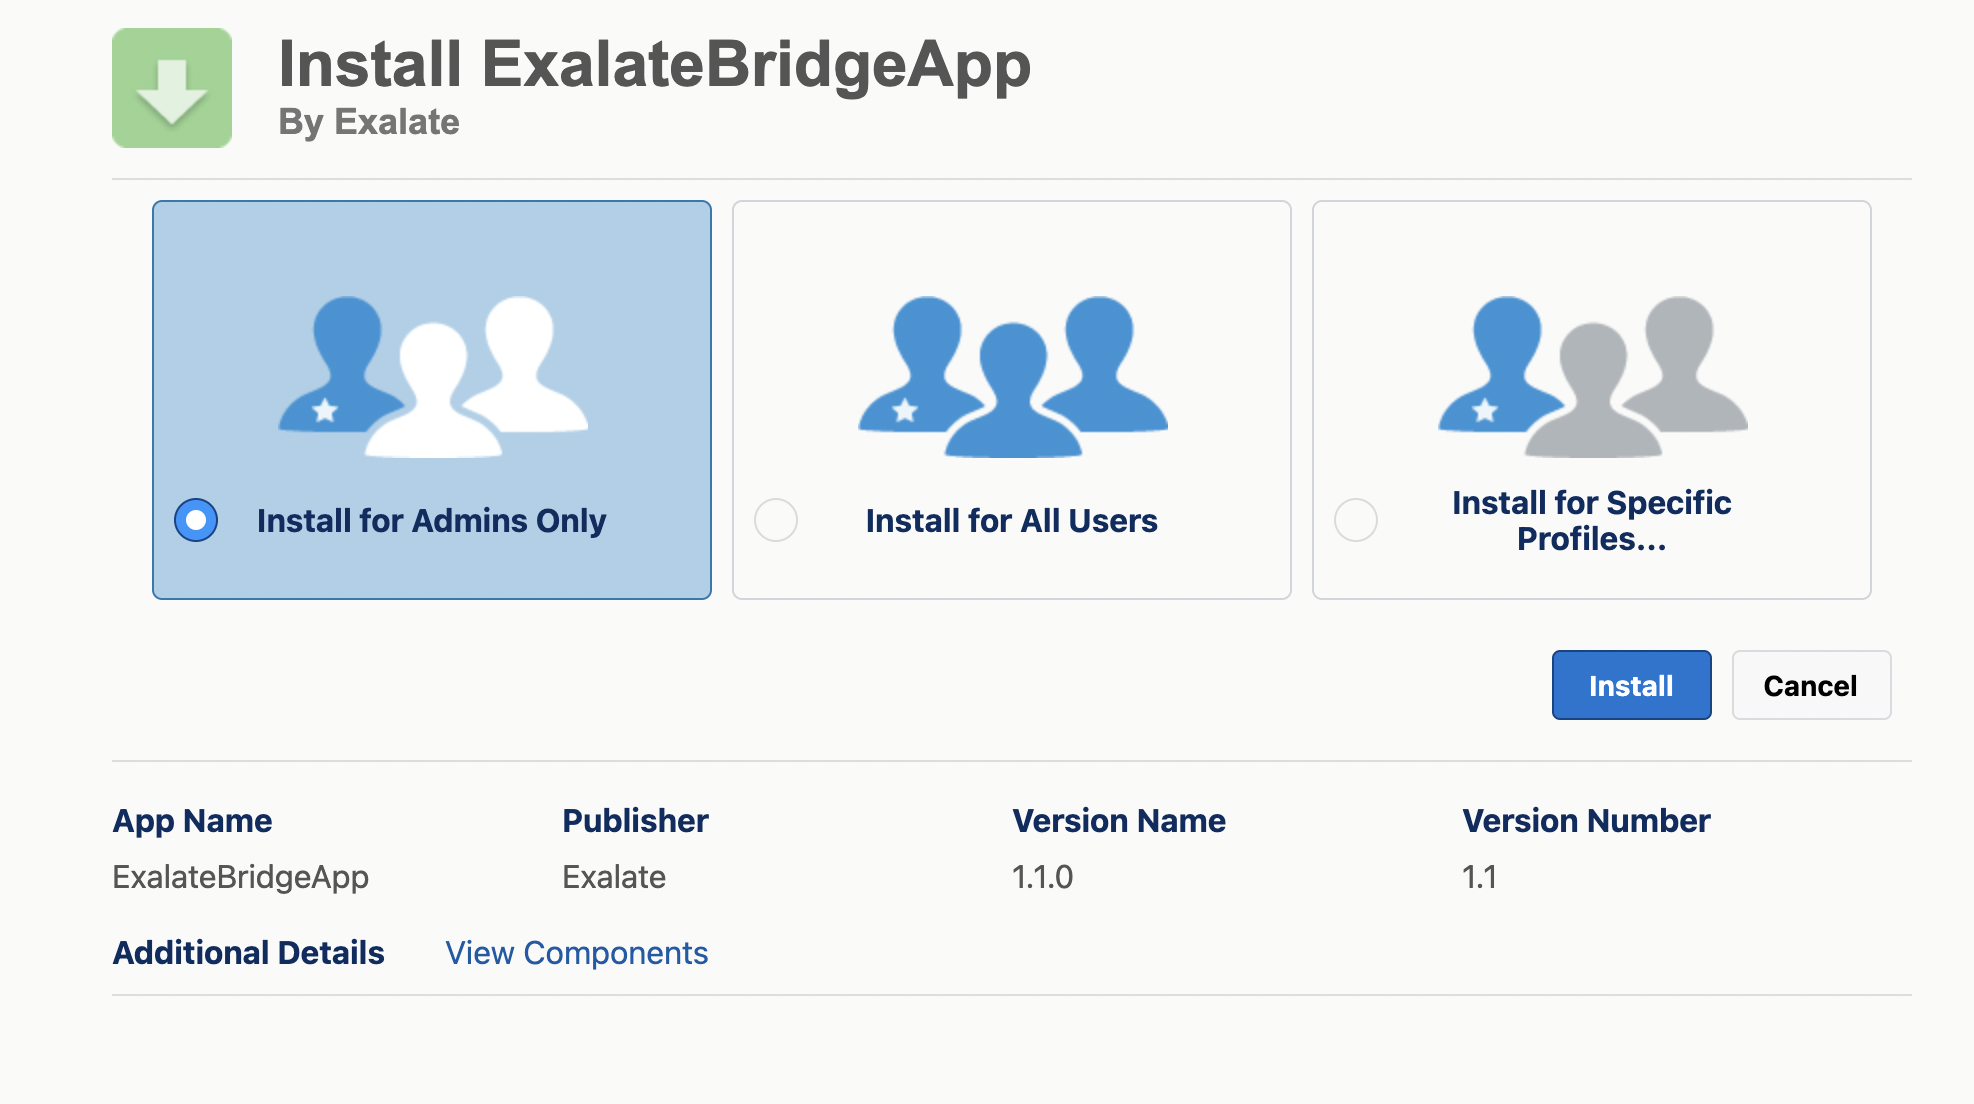 Install Exalate BridgeApp on AppExchage for specific users